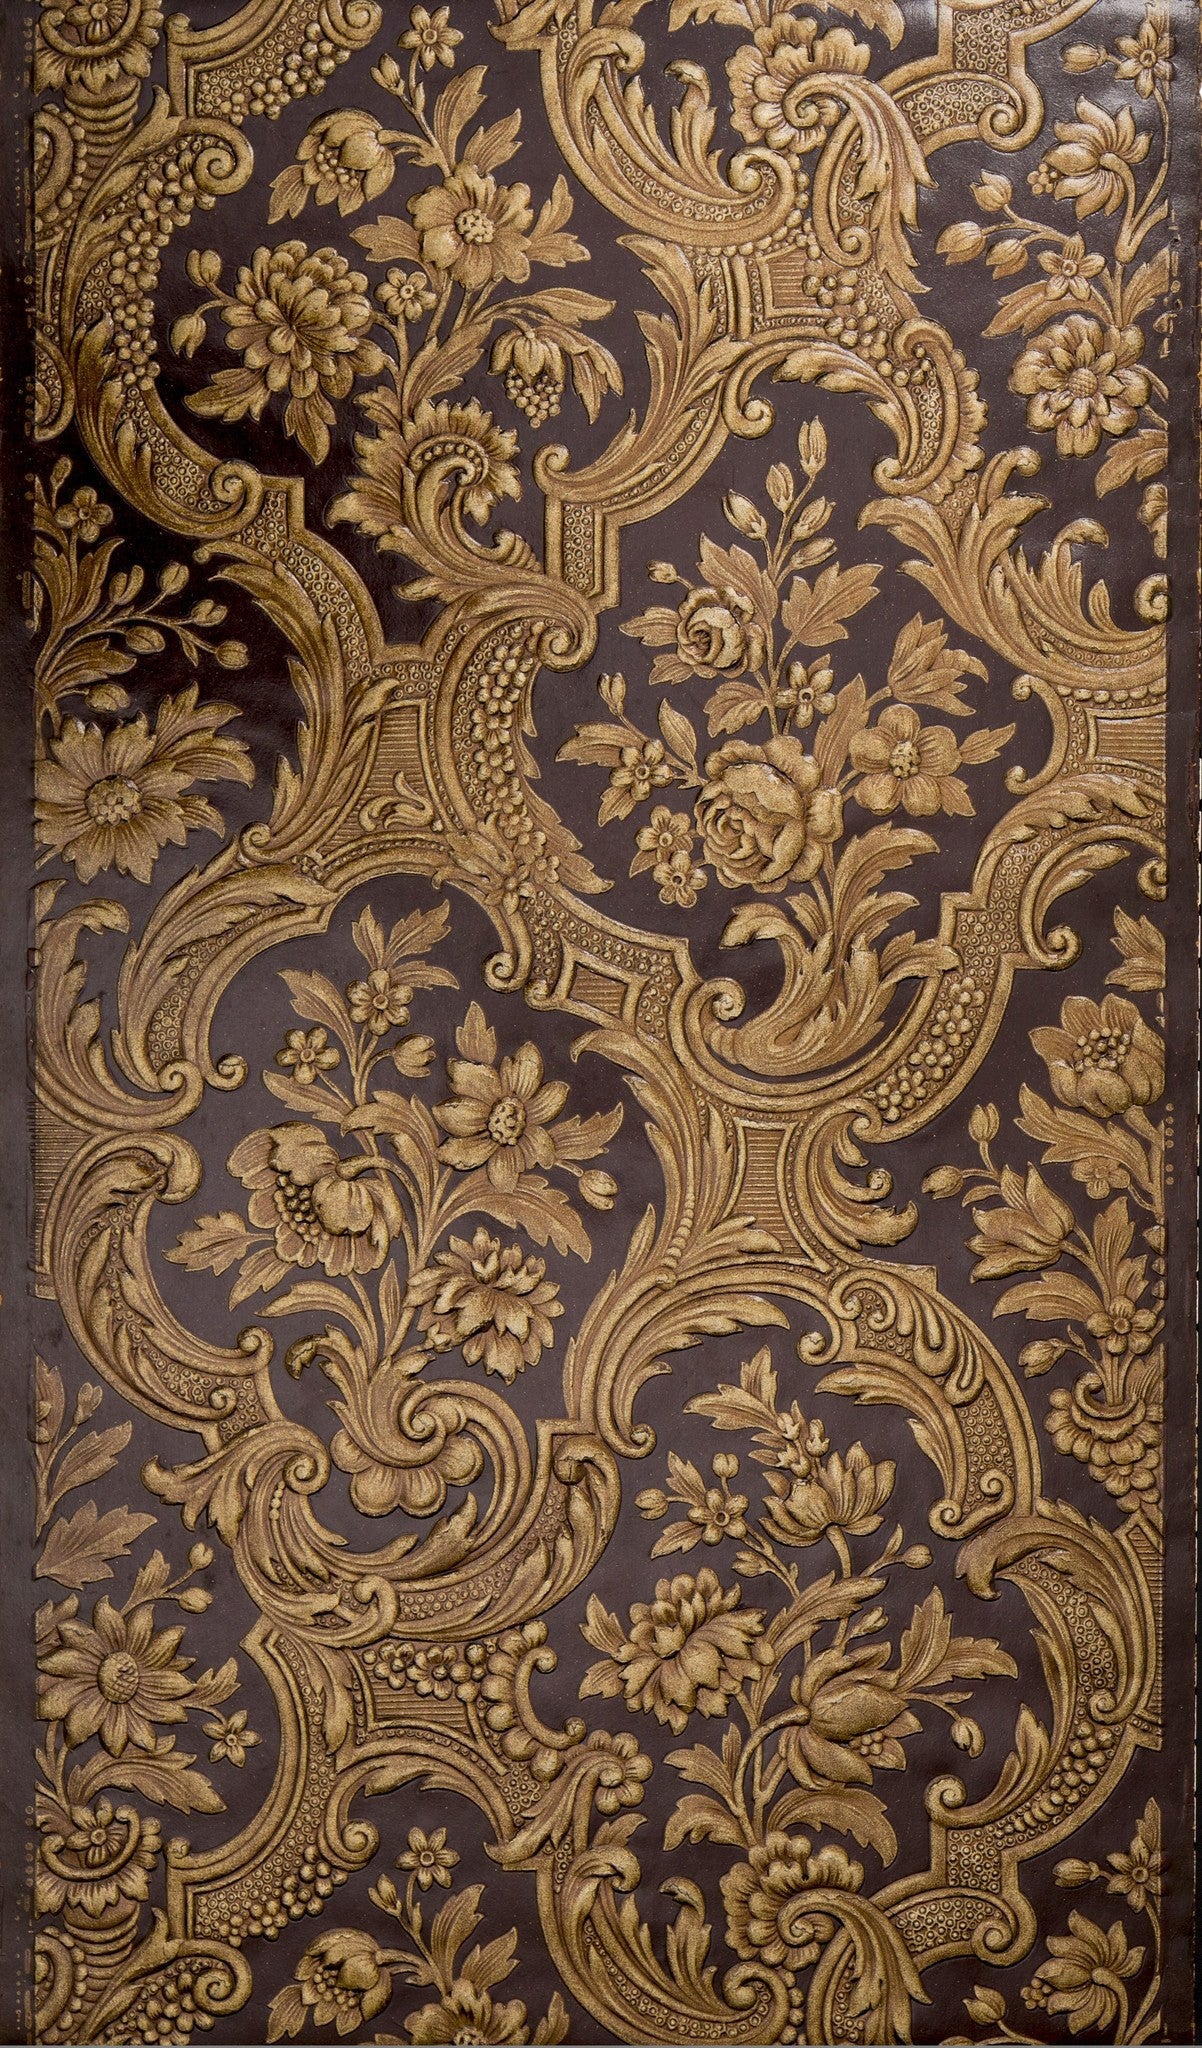 Deeply Embossed Rococo Floral - Antique Wallpaper Remnant